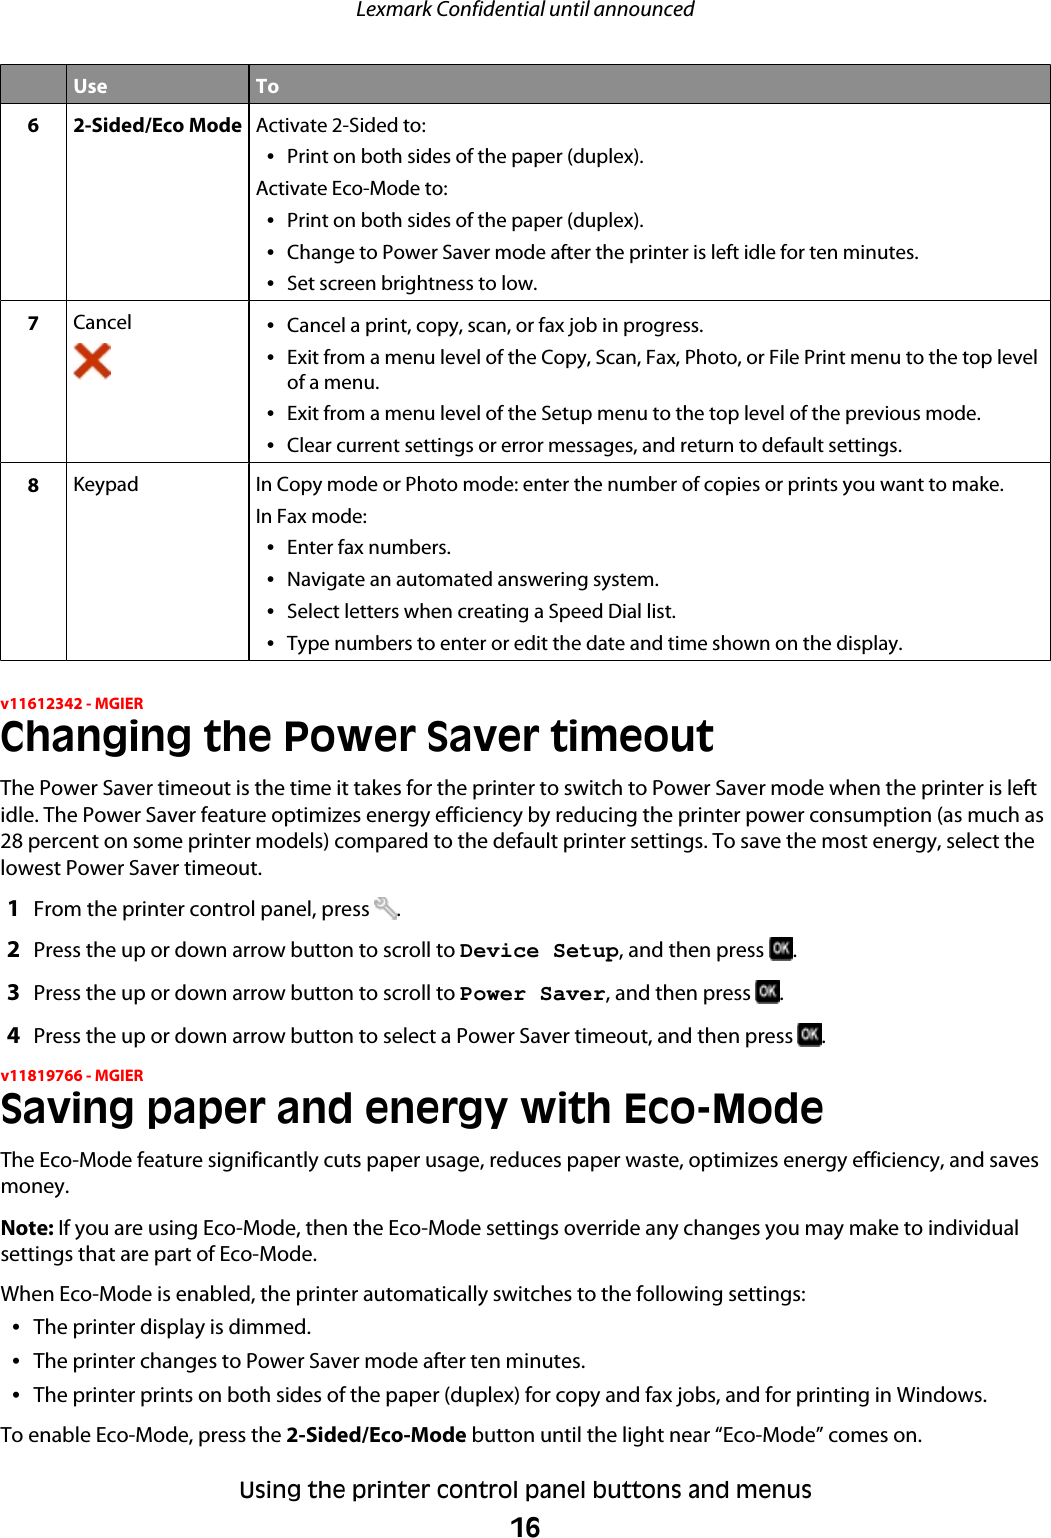 Use To6 2-Sided/Eco Mode Activate 2-Sided to:•Print on both sides of the paper (duplex).Activate Eco-Mode to:•Print on both sides of the paper (duplex).•Change to Power Saver mode after the printer is left idle for ten minutes.•Set screen brightness to low.7Cancel •Cancel a print, copy, scan, or fax job in progress.•Exit from a menu level of the Copy, Scan, Fax, Photo, or File Print menu to the top levelof a menu.•Exit from a menu level of the Setup menu to the top level of the previous mode.•Clear current settings or error messages, and return to default settings.8Keypad In Copy mode or Photo mode: enter the number of copies or prints you want to make.In Fax mode:•Enter fax numbers.•Navigate an automated answering system.•Select letters when creating a Speed Dial list.•Type numbers to enter or edit the date and time shown on the display.v11612342 - MGIERChanging the Power Saver timeoutThe Power Saver timeout is the time it takes for the printer to switch to Power Saver mode when the printer is leftidle. The Power Saver feature optimizes energy efficiency by reducing the printer power consumption (as much as28 percent on some printer models) compared to the default printer settings. To save the most energy, select thelowest Power Saver timeout.1From the printer control panel, press  .2Press the up or down arrow button to scroll to Device Setup, and then press  .3Press the up or down arrow button to scroll to Power Saver, and then press  .4Press the up or down arrow button to select a Power Saver timeout, and then press  .v11819766 - MGIERSaving paper and energy with Eco-ModeThe Eco-Mode feature significantly cuts paper usage, reduces paper waste, optimizes energy efficiency, and savesmoney.Note: If you are using Eco-Mode, then the Eco-Mode settings override any changes you may make to individualsettings that are part of Eco-Mode.When Eco-Mode is enabled, the printer automatically switches to the following settings:•The printer display is dimmed.•The printer changes to Power Saver mode after ten minutes.•The printer prints on both sides of the paper (duplex) for copy and fax jobs, and for printing in Windows.To enable Eco-Mode, press the 2-Sided/Eco-Mode button until the light near “Eco-Mode” comes on.Lexmark Confidential until announcedUsing the printer control panel buttons and menus16